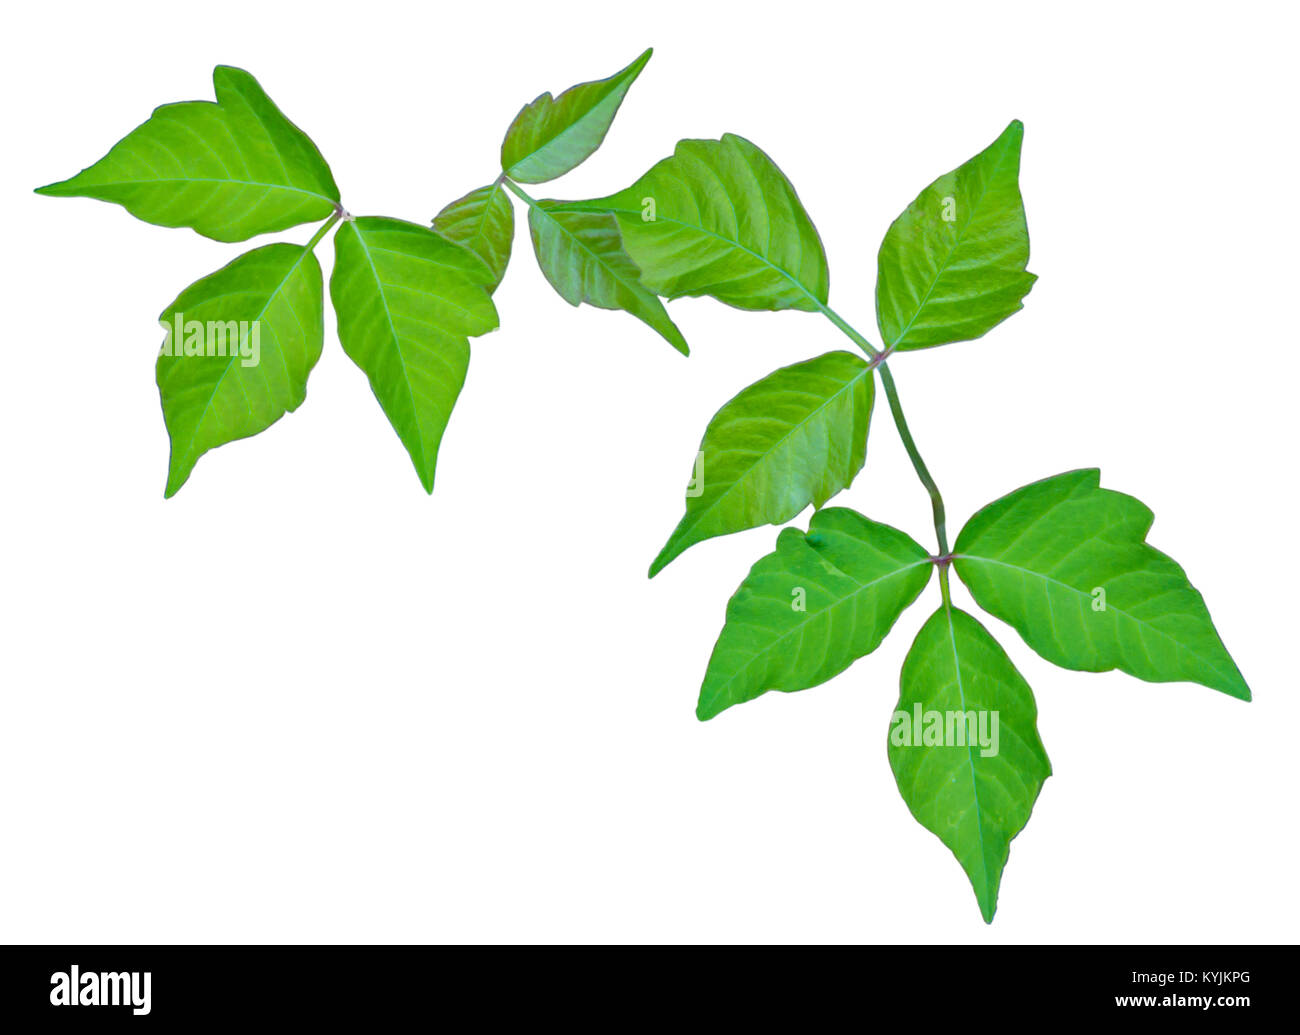 Poison ivy rash. Cut Out Stock Images & Pictures - Alamy